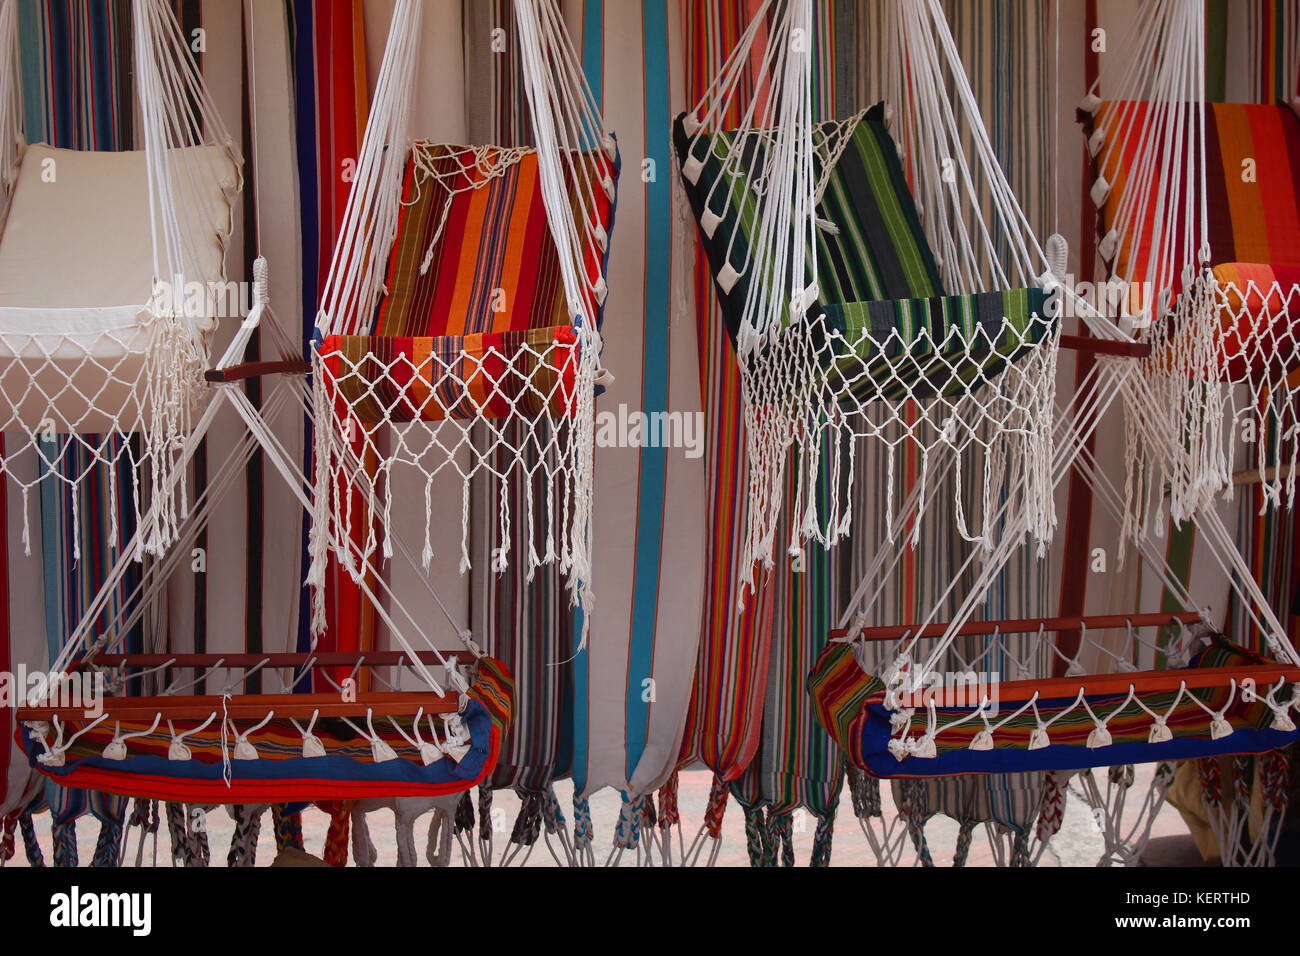 Colorful hammocks for sale at the outdoor craft market in Otavalo, Ecuador Stock Photo